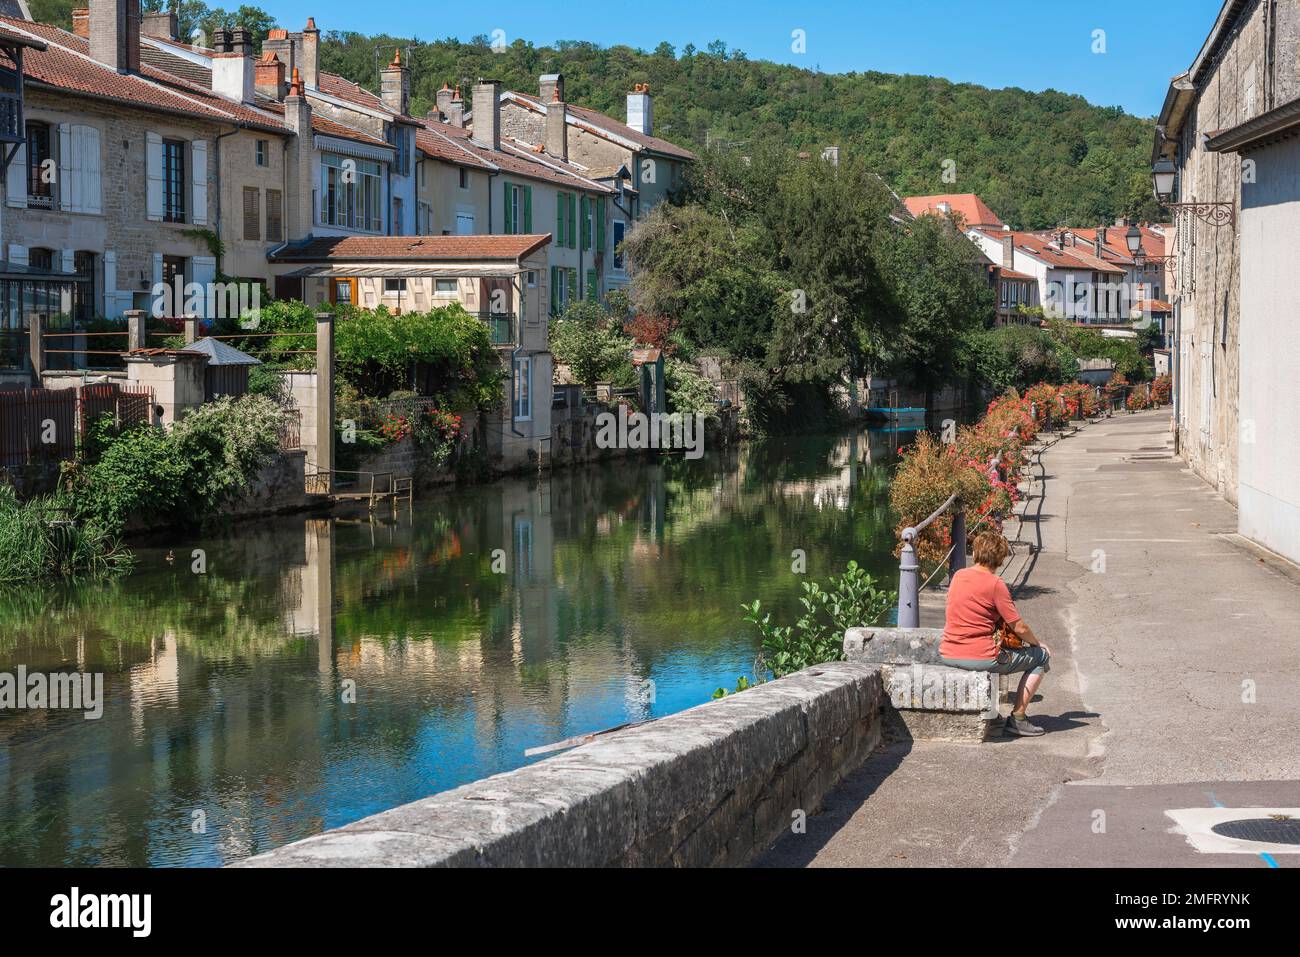 Joinville France, view in summer of the Quai des Peceaux, a waterfront path along the Marne River in the scenic town of Joinville, Haute-Marne, France Stock Photo